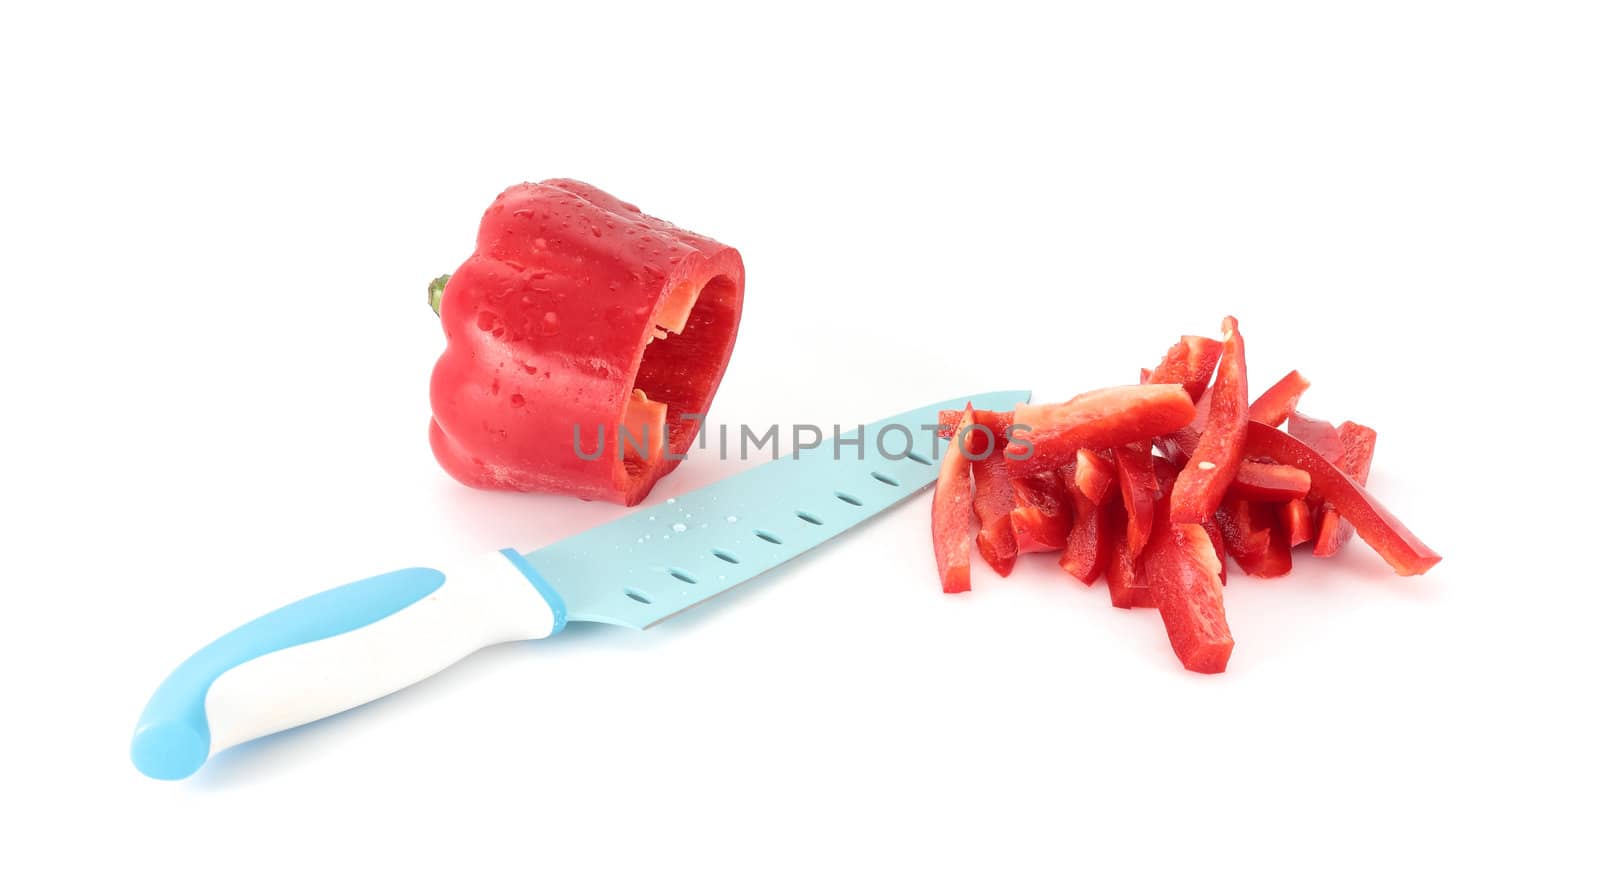 Chopped red pepper with kitchen knife isolated on white